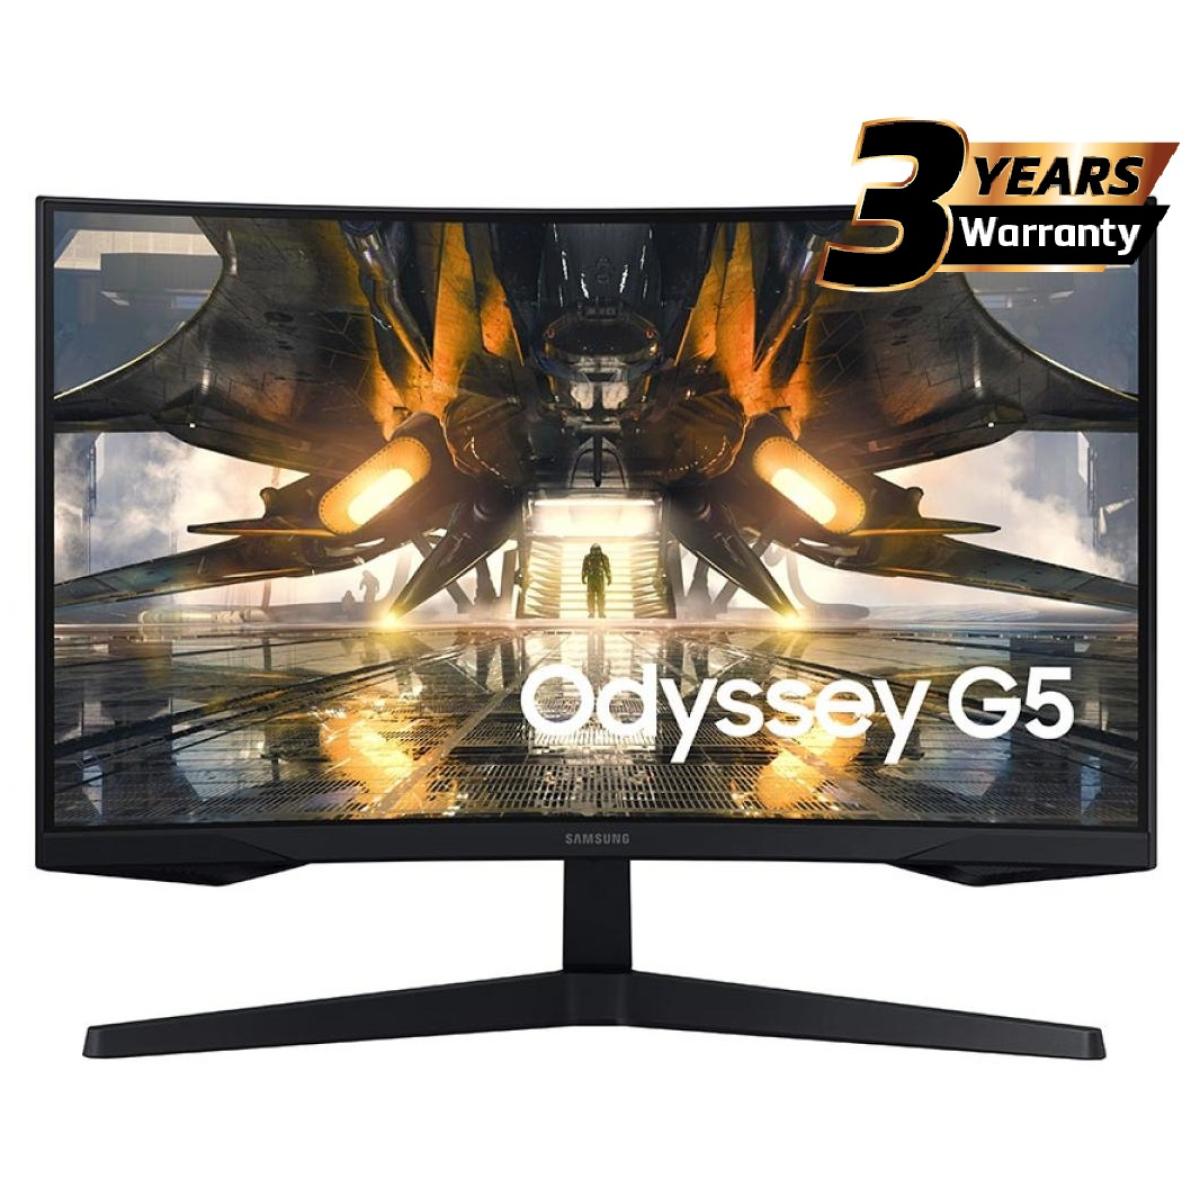 Samsung 27" Odyssey G55T Gaming WQHD 144Hz 1ms HDR Curved Gaming Monitor